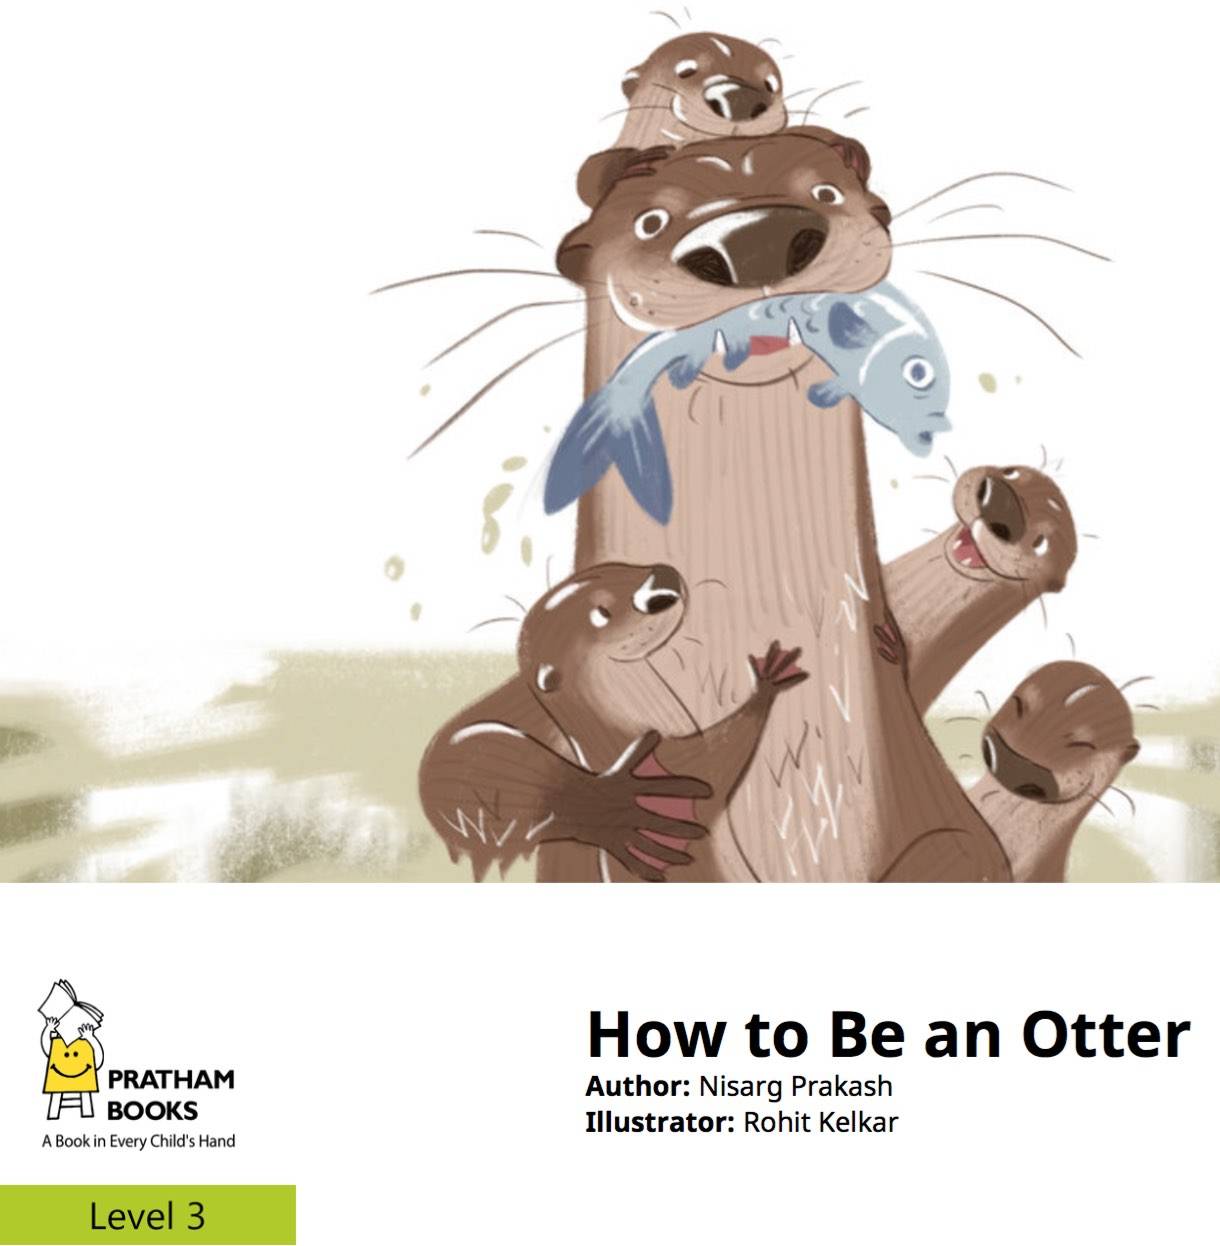 How to be an Otter - early elementary nature book - Free Kids Books